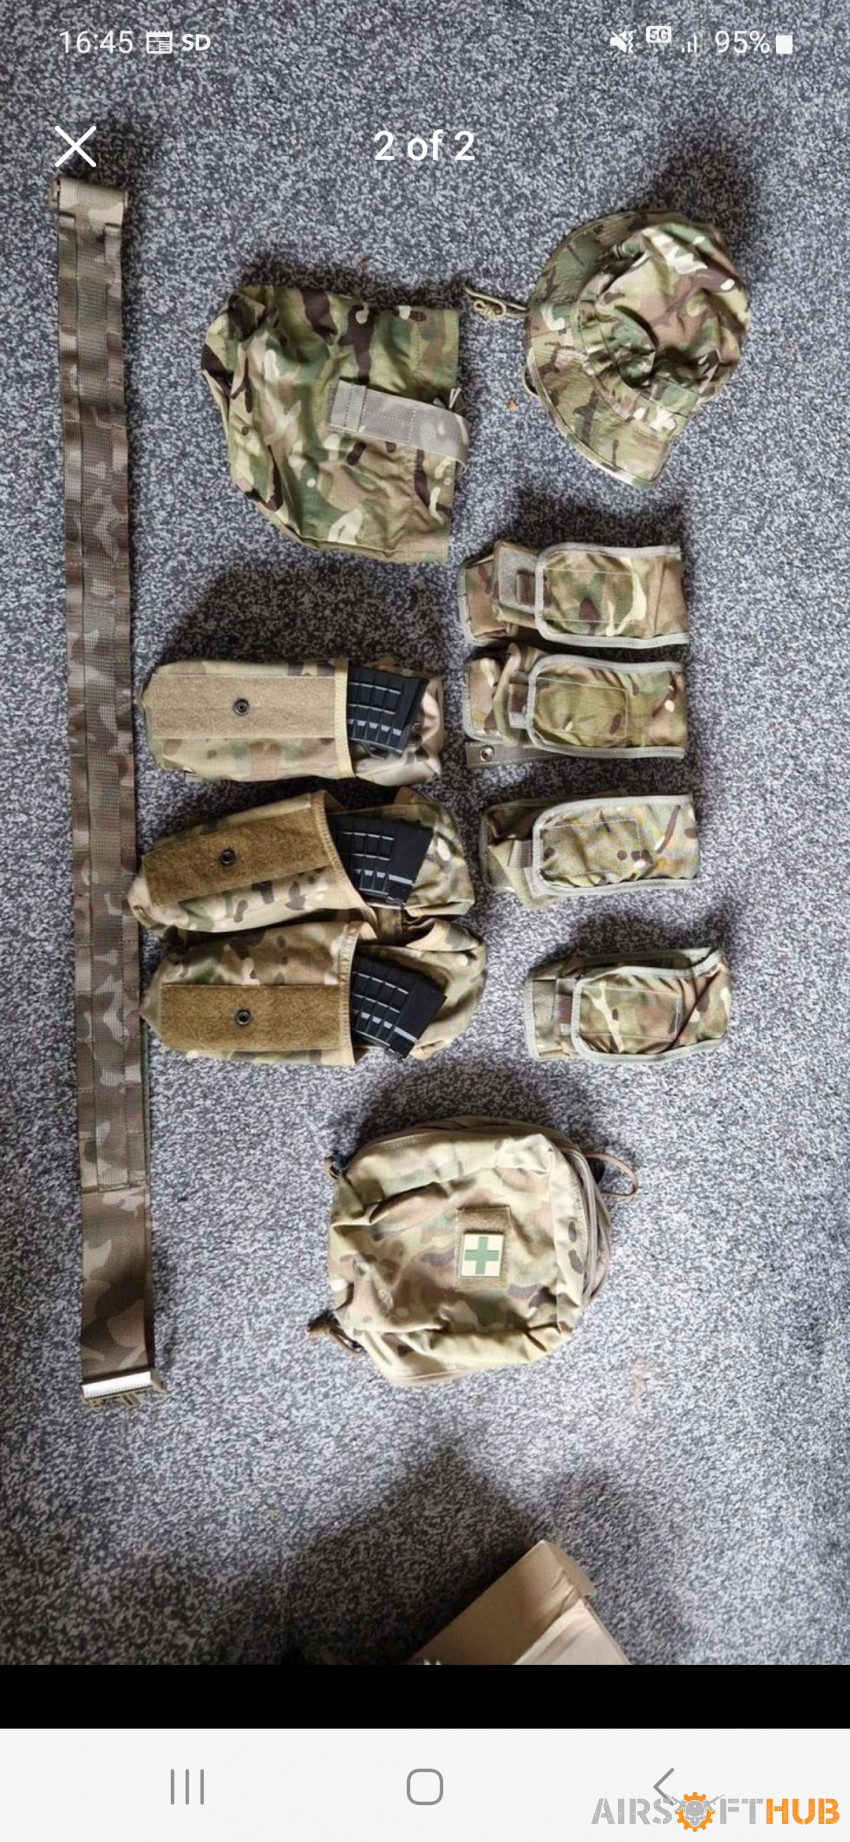 Kit for sale - Used airsoft equipment